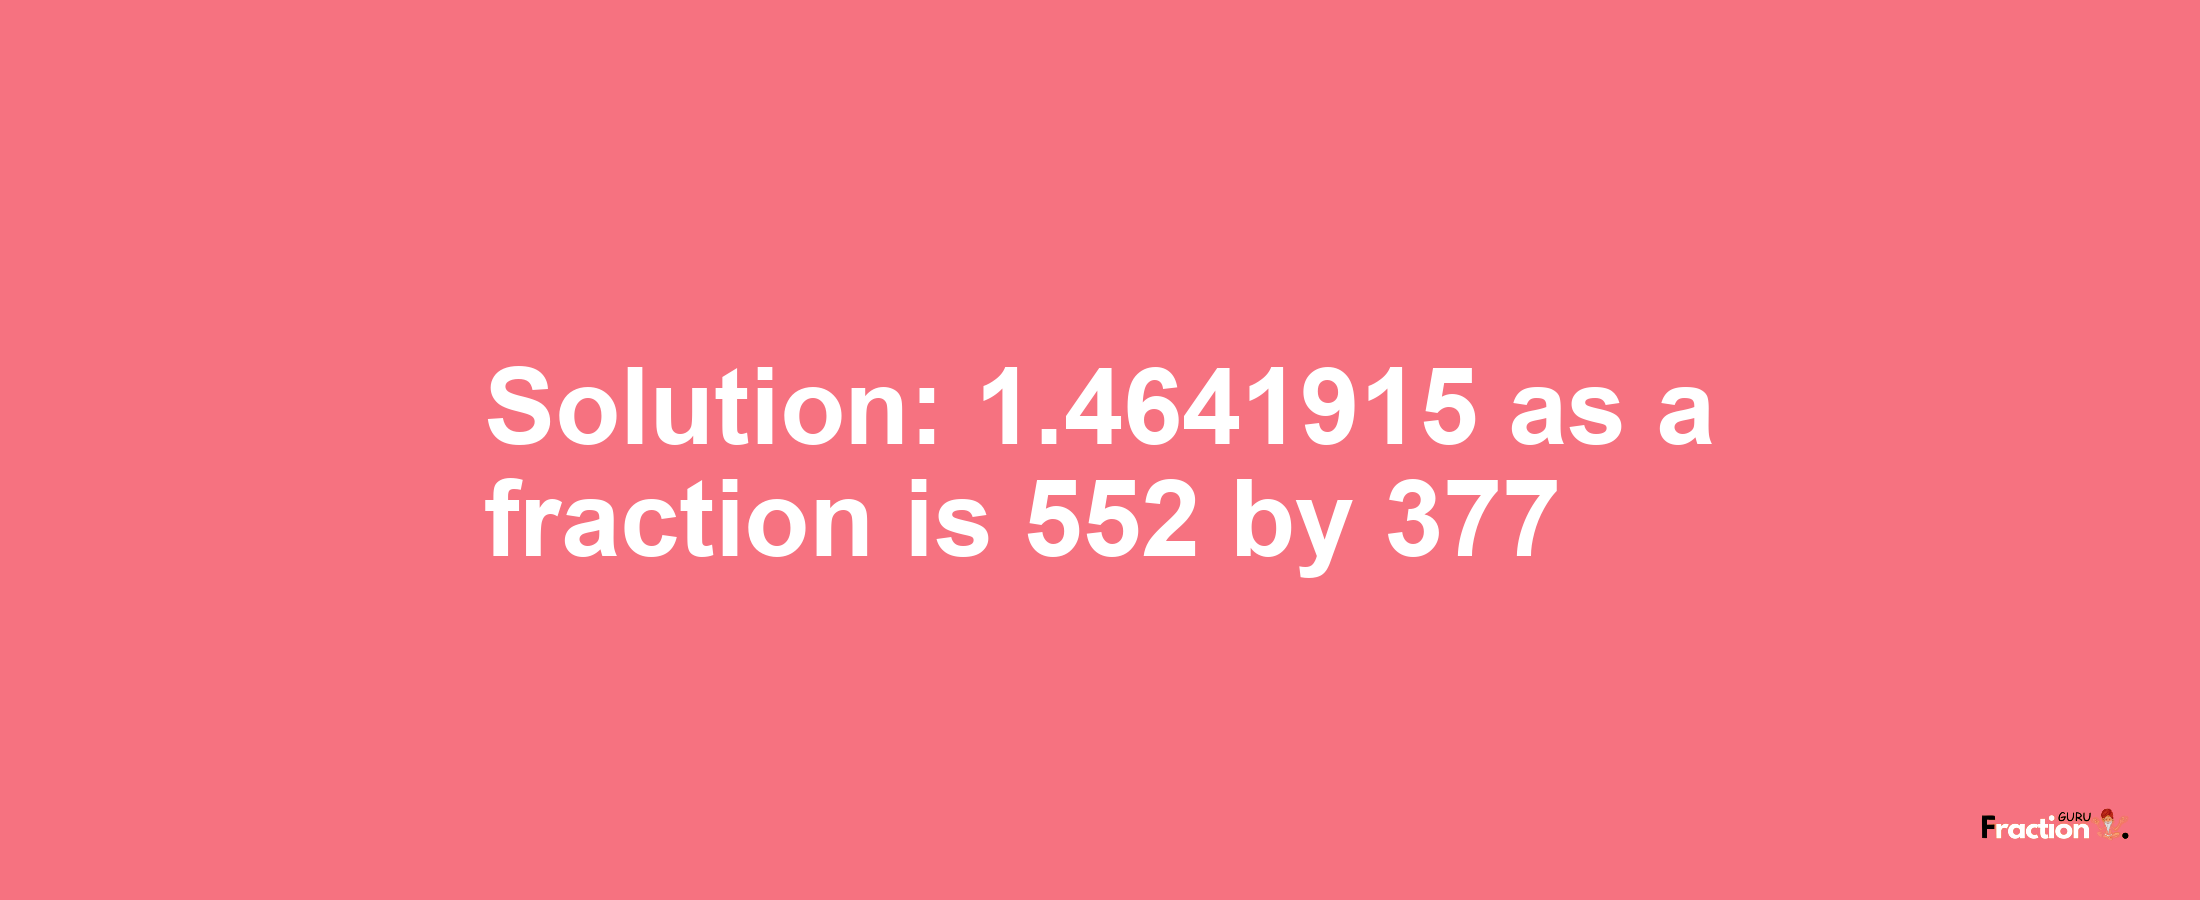 Solution:1.4641915 as a fraction is 552/377